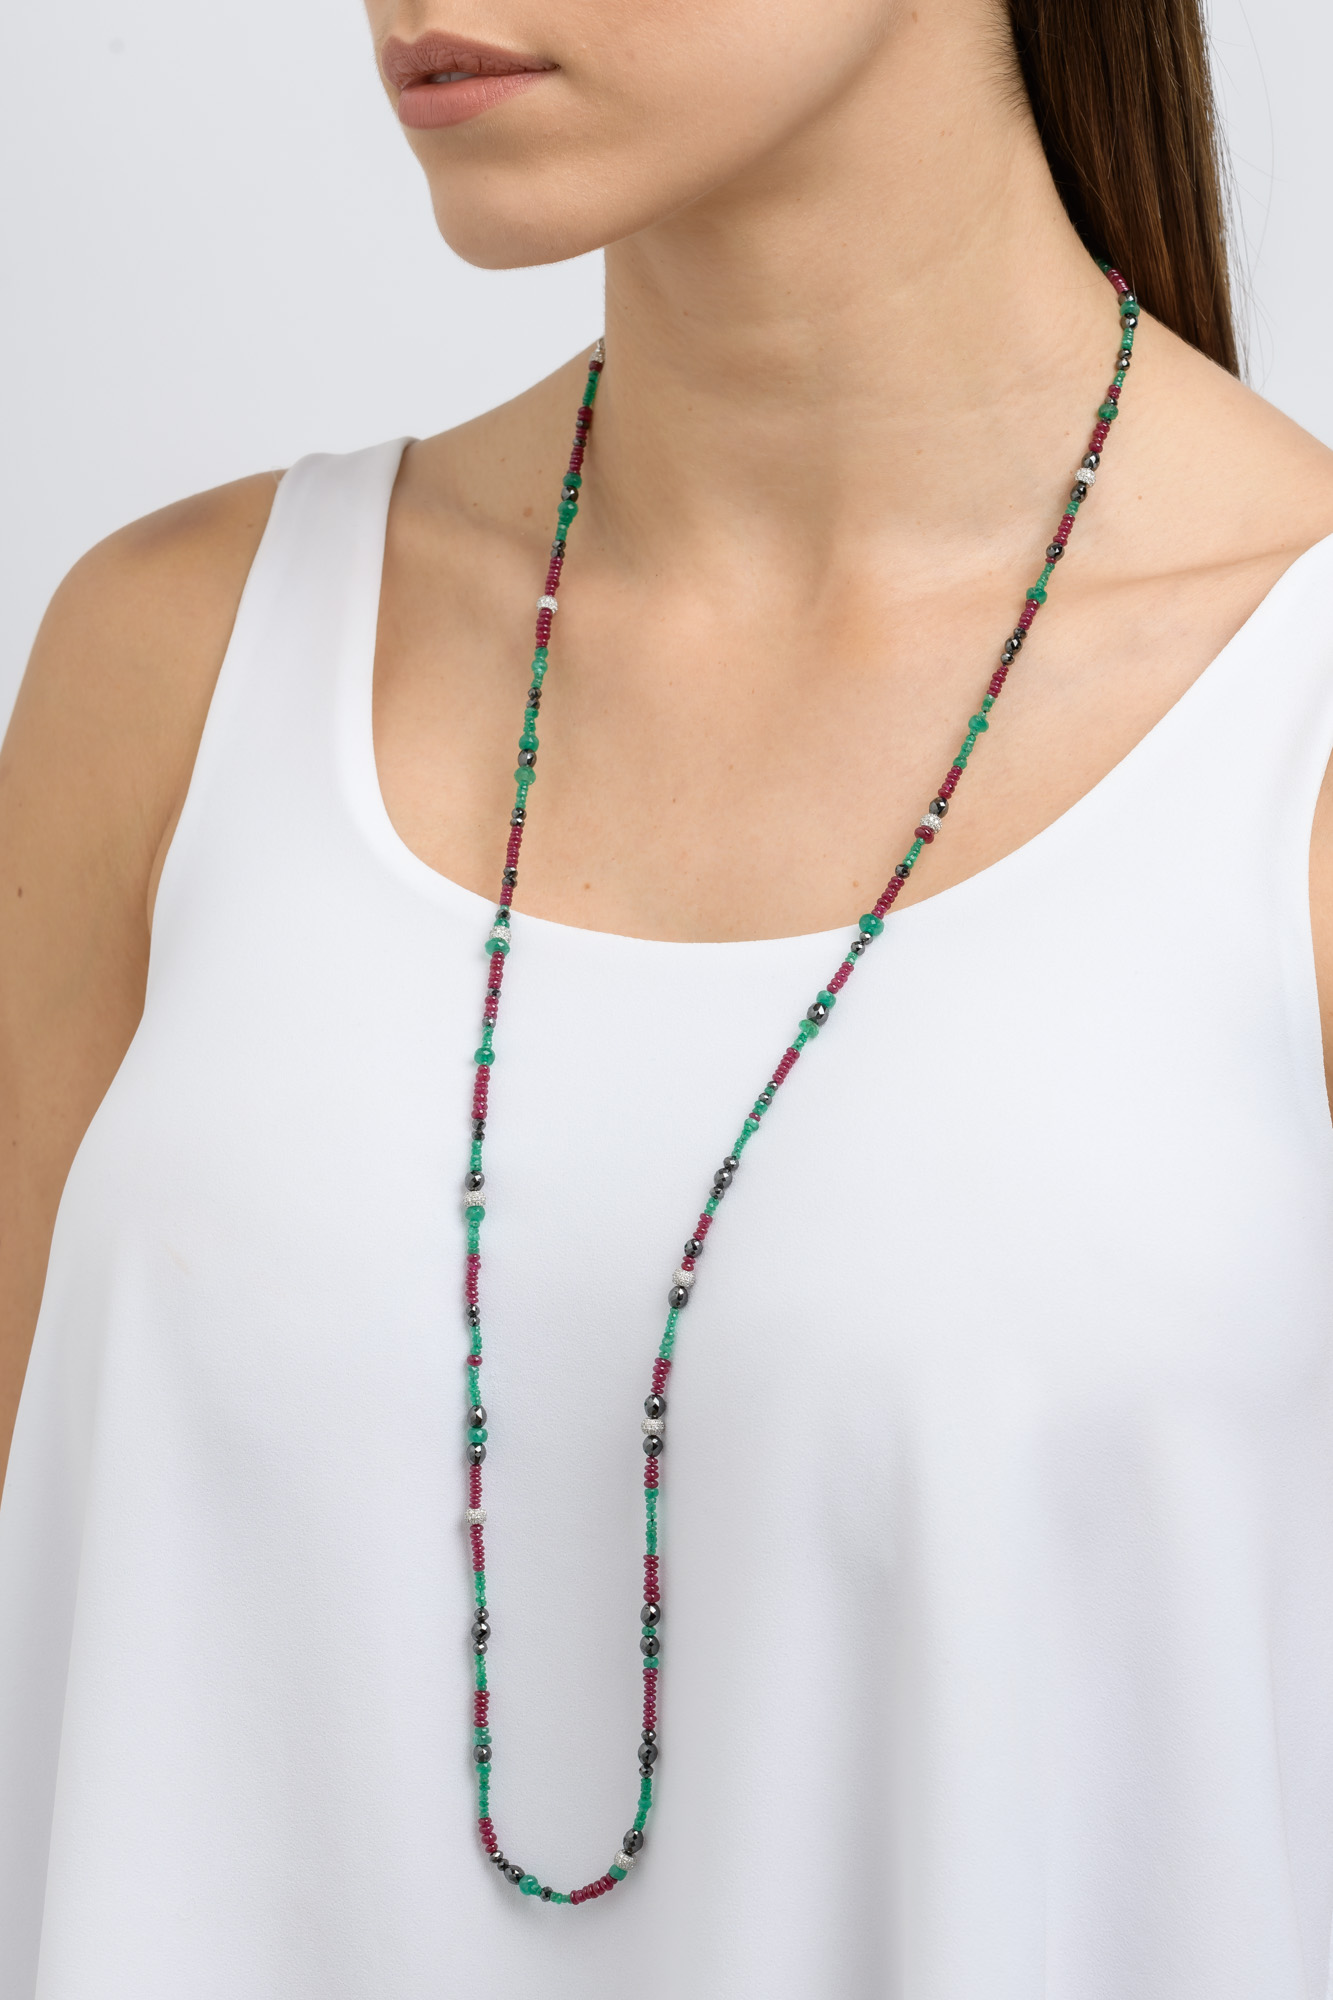 Details about   MARVELLOUS SUPERB 312.00 CTS EARTH MINED RUBY & EMERALD BEADS NECKLACE STRAND 